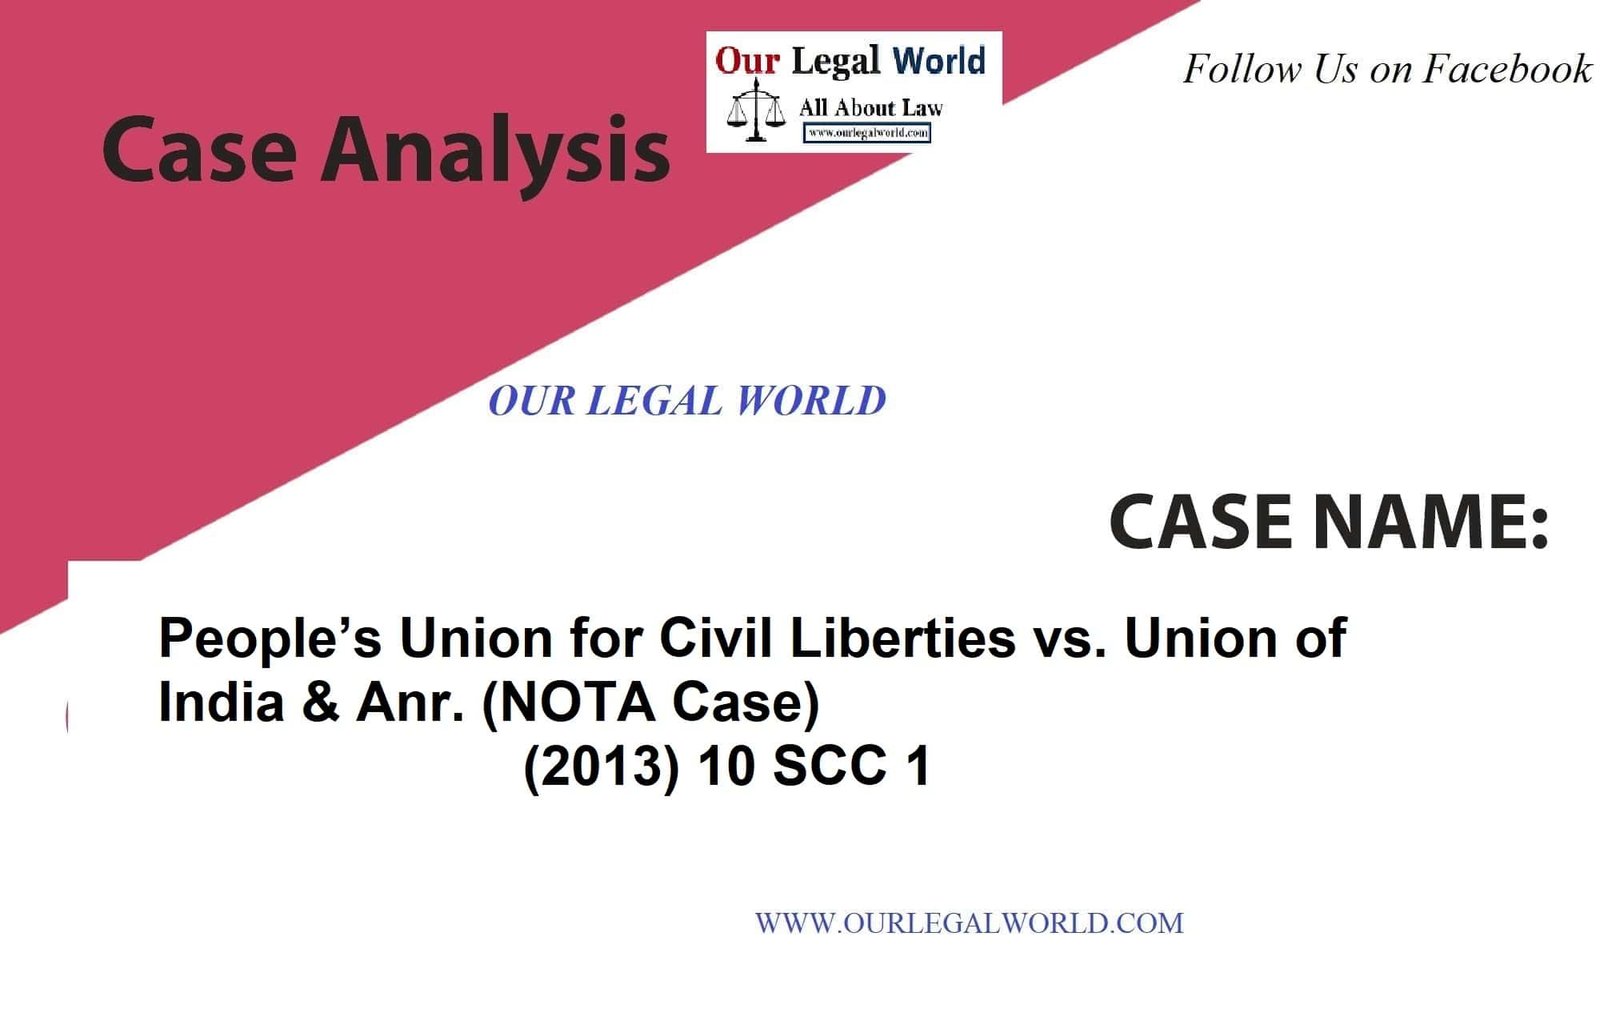 PUCL v. Union of India & anr. (NOTA CASE ) 2013- Our Legal World